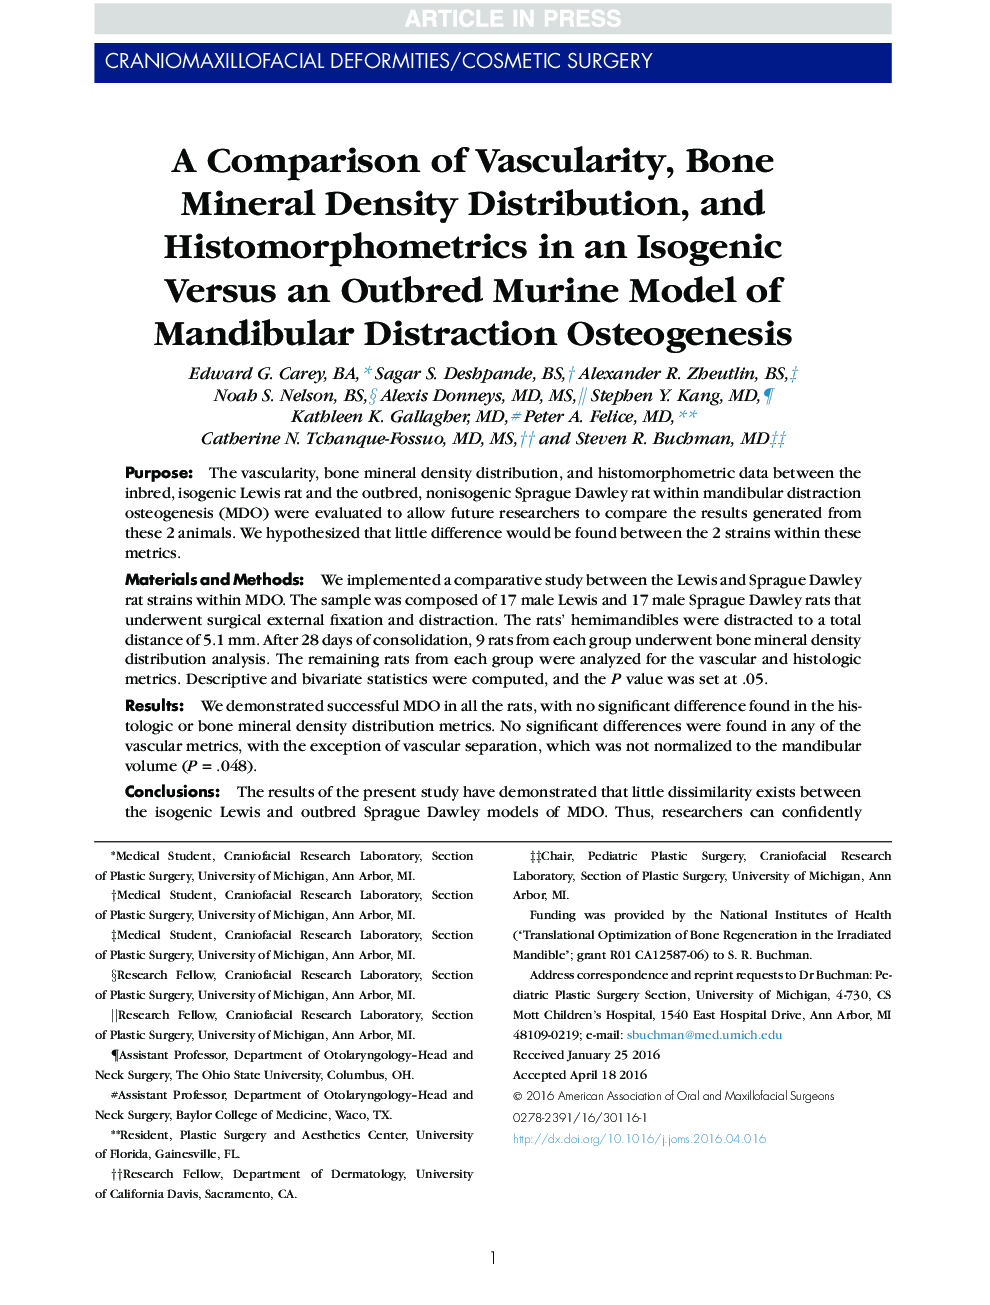 A Comparison of Vascularity, Bone Mineral Density Distribution, and Histomorphometrics in an Isogenic Versus an Outbred Murine Model of Mandibular Distraction Osteogenesis